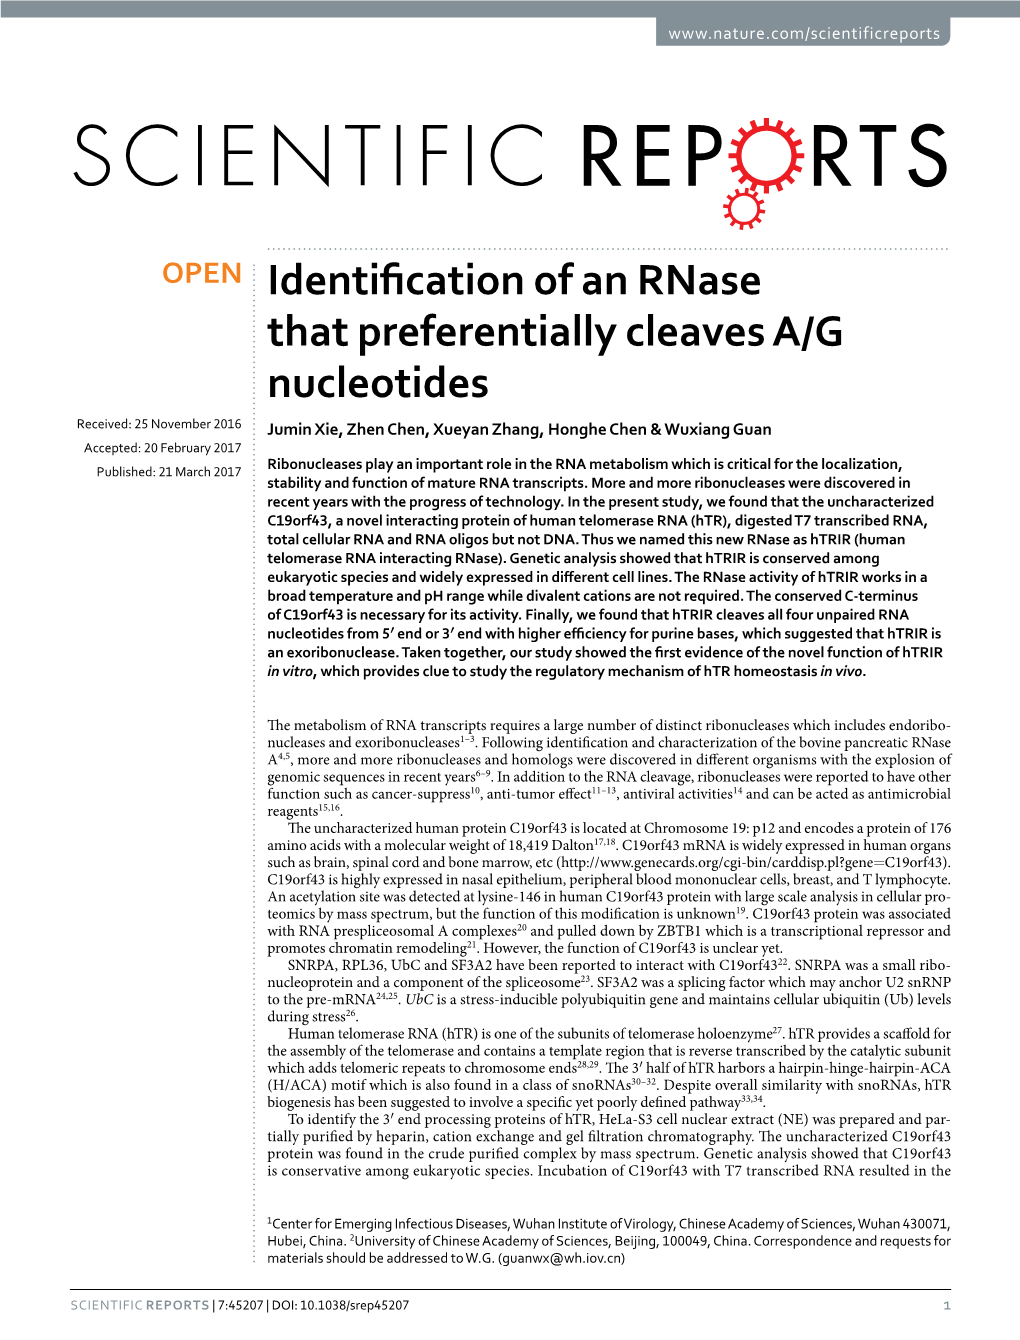 Identification of an Rnase That Preferentially Cleaves A/G Nucleotides